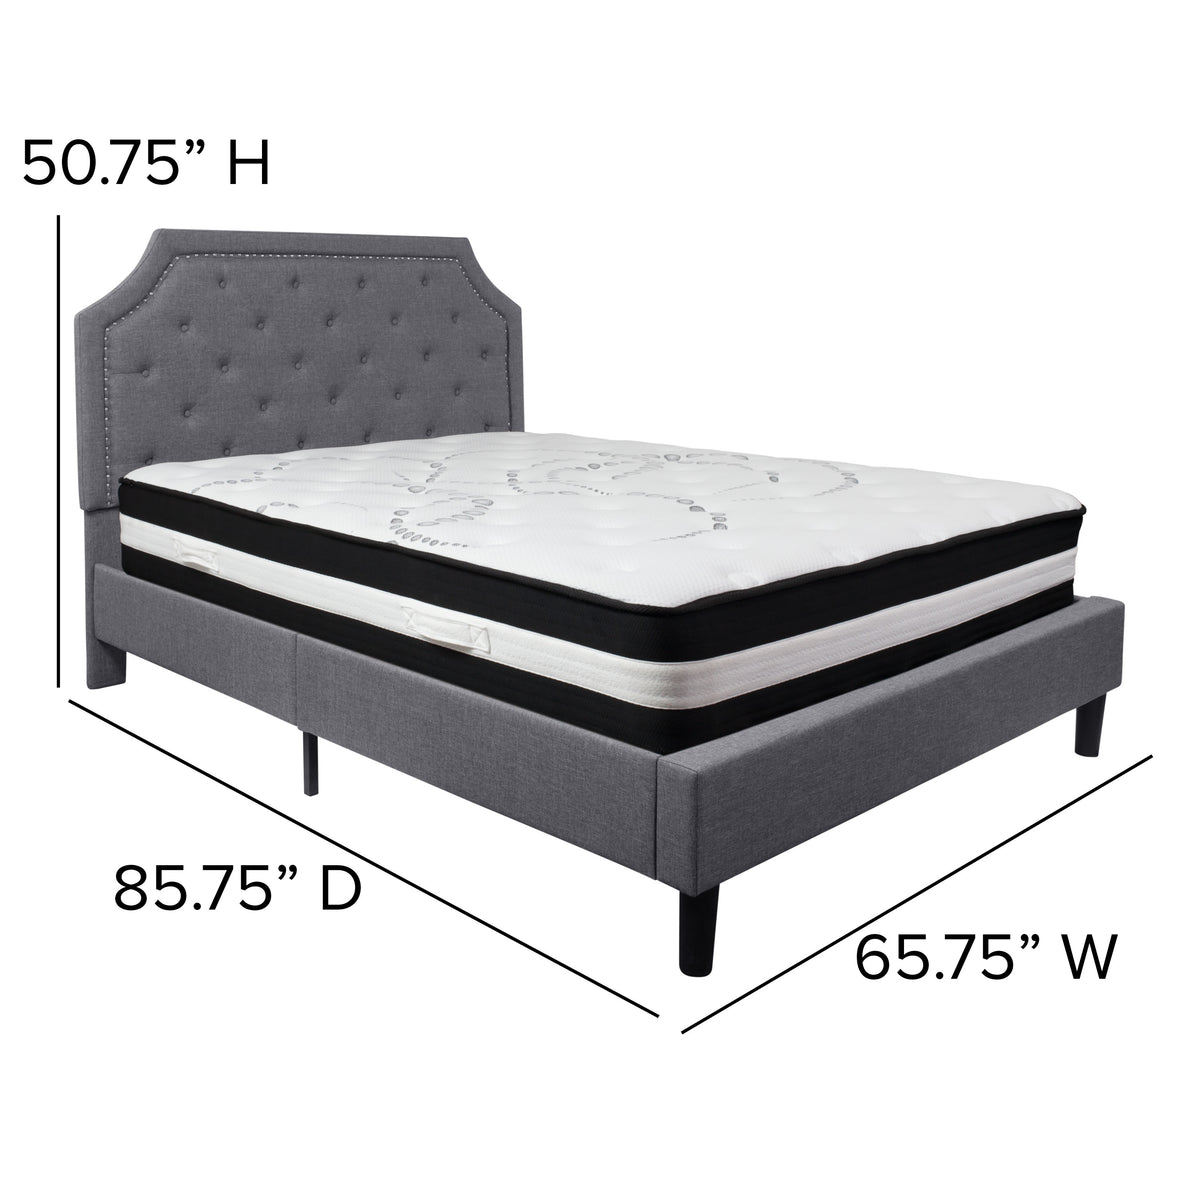 Light Gray,Queen |#| Queen Size Arched Tufted Lt Gray Fabric Platform Bed w/ Pocket Spring Mattress